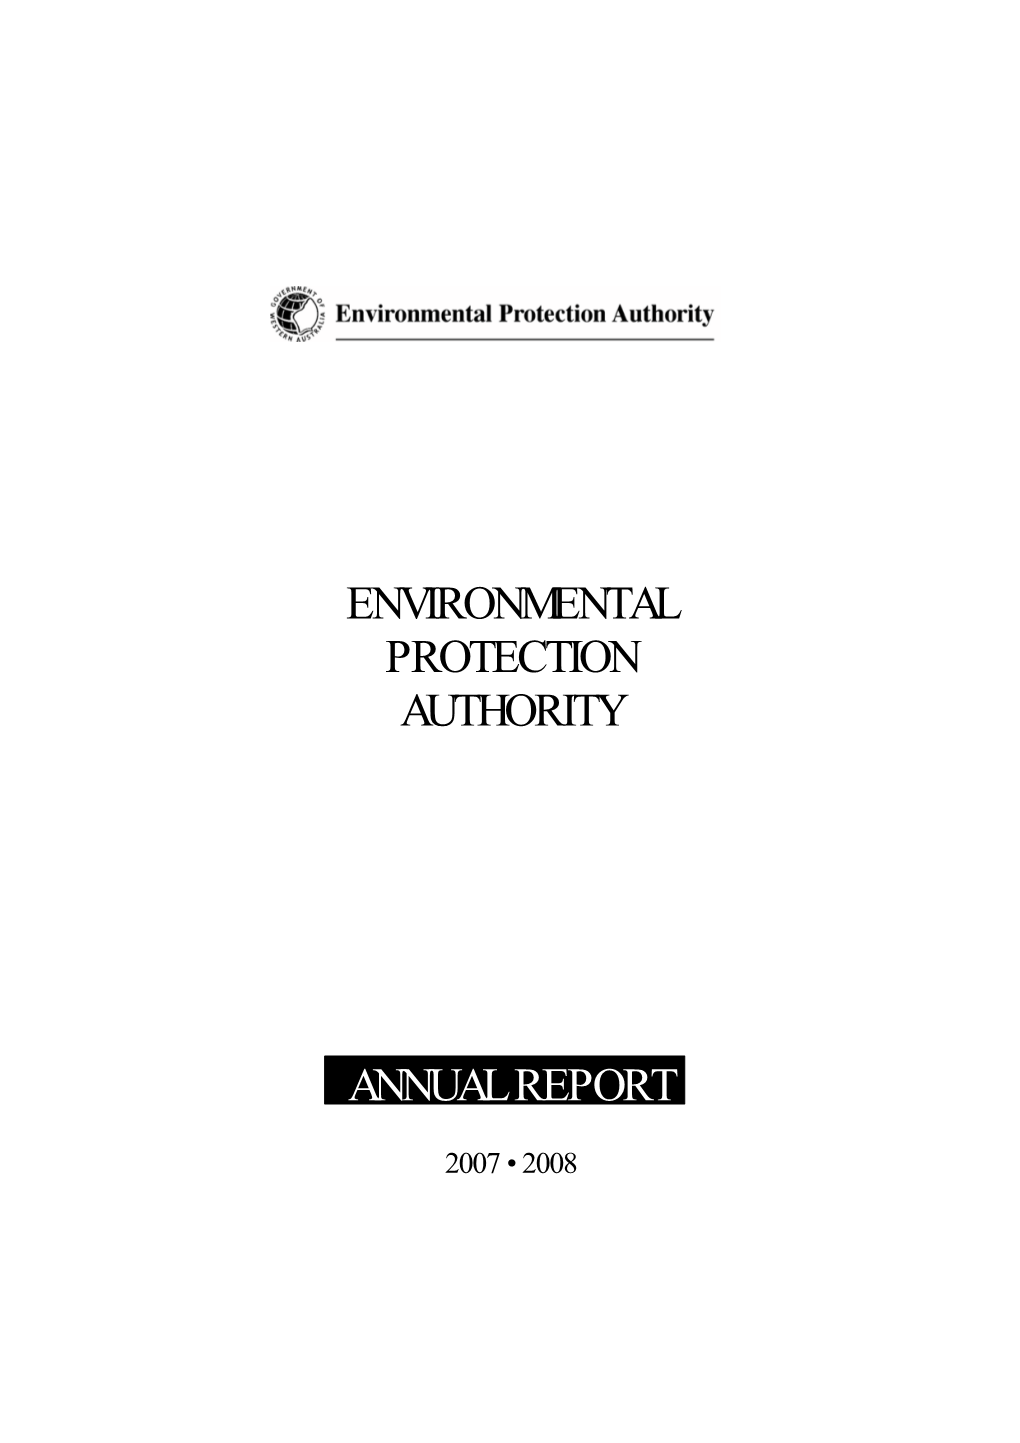 Environmental Protection Authority Annual